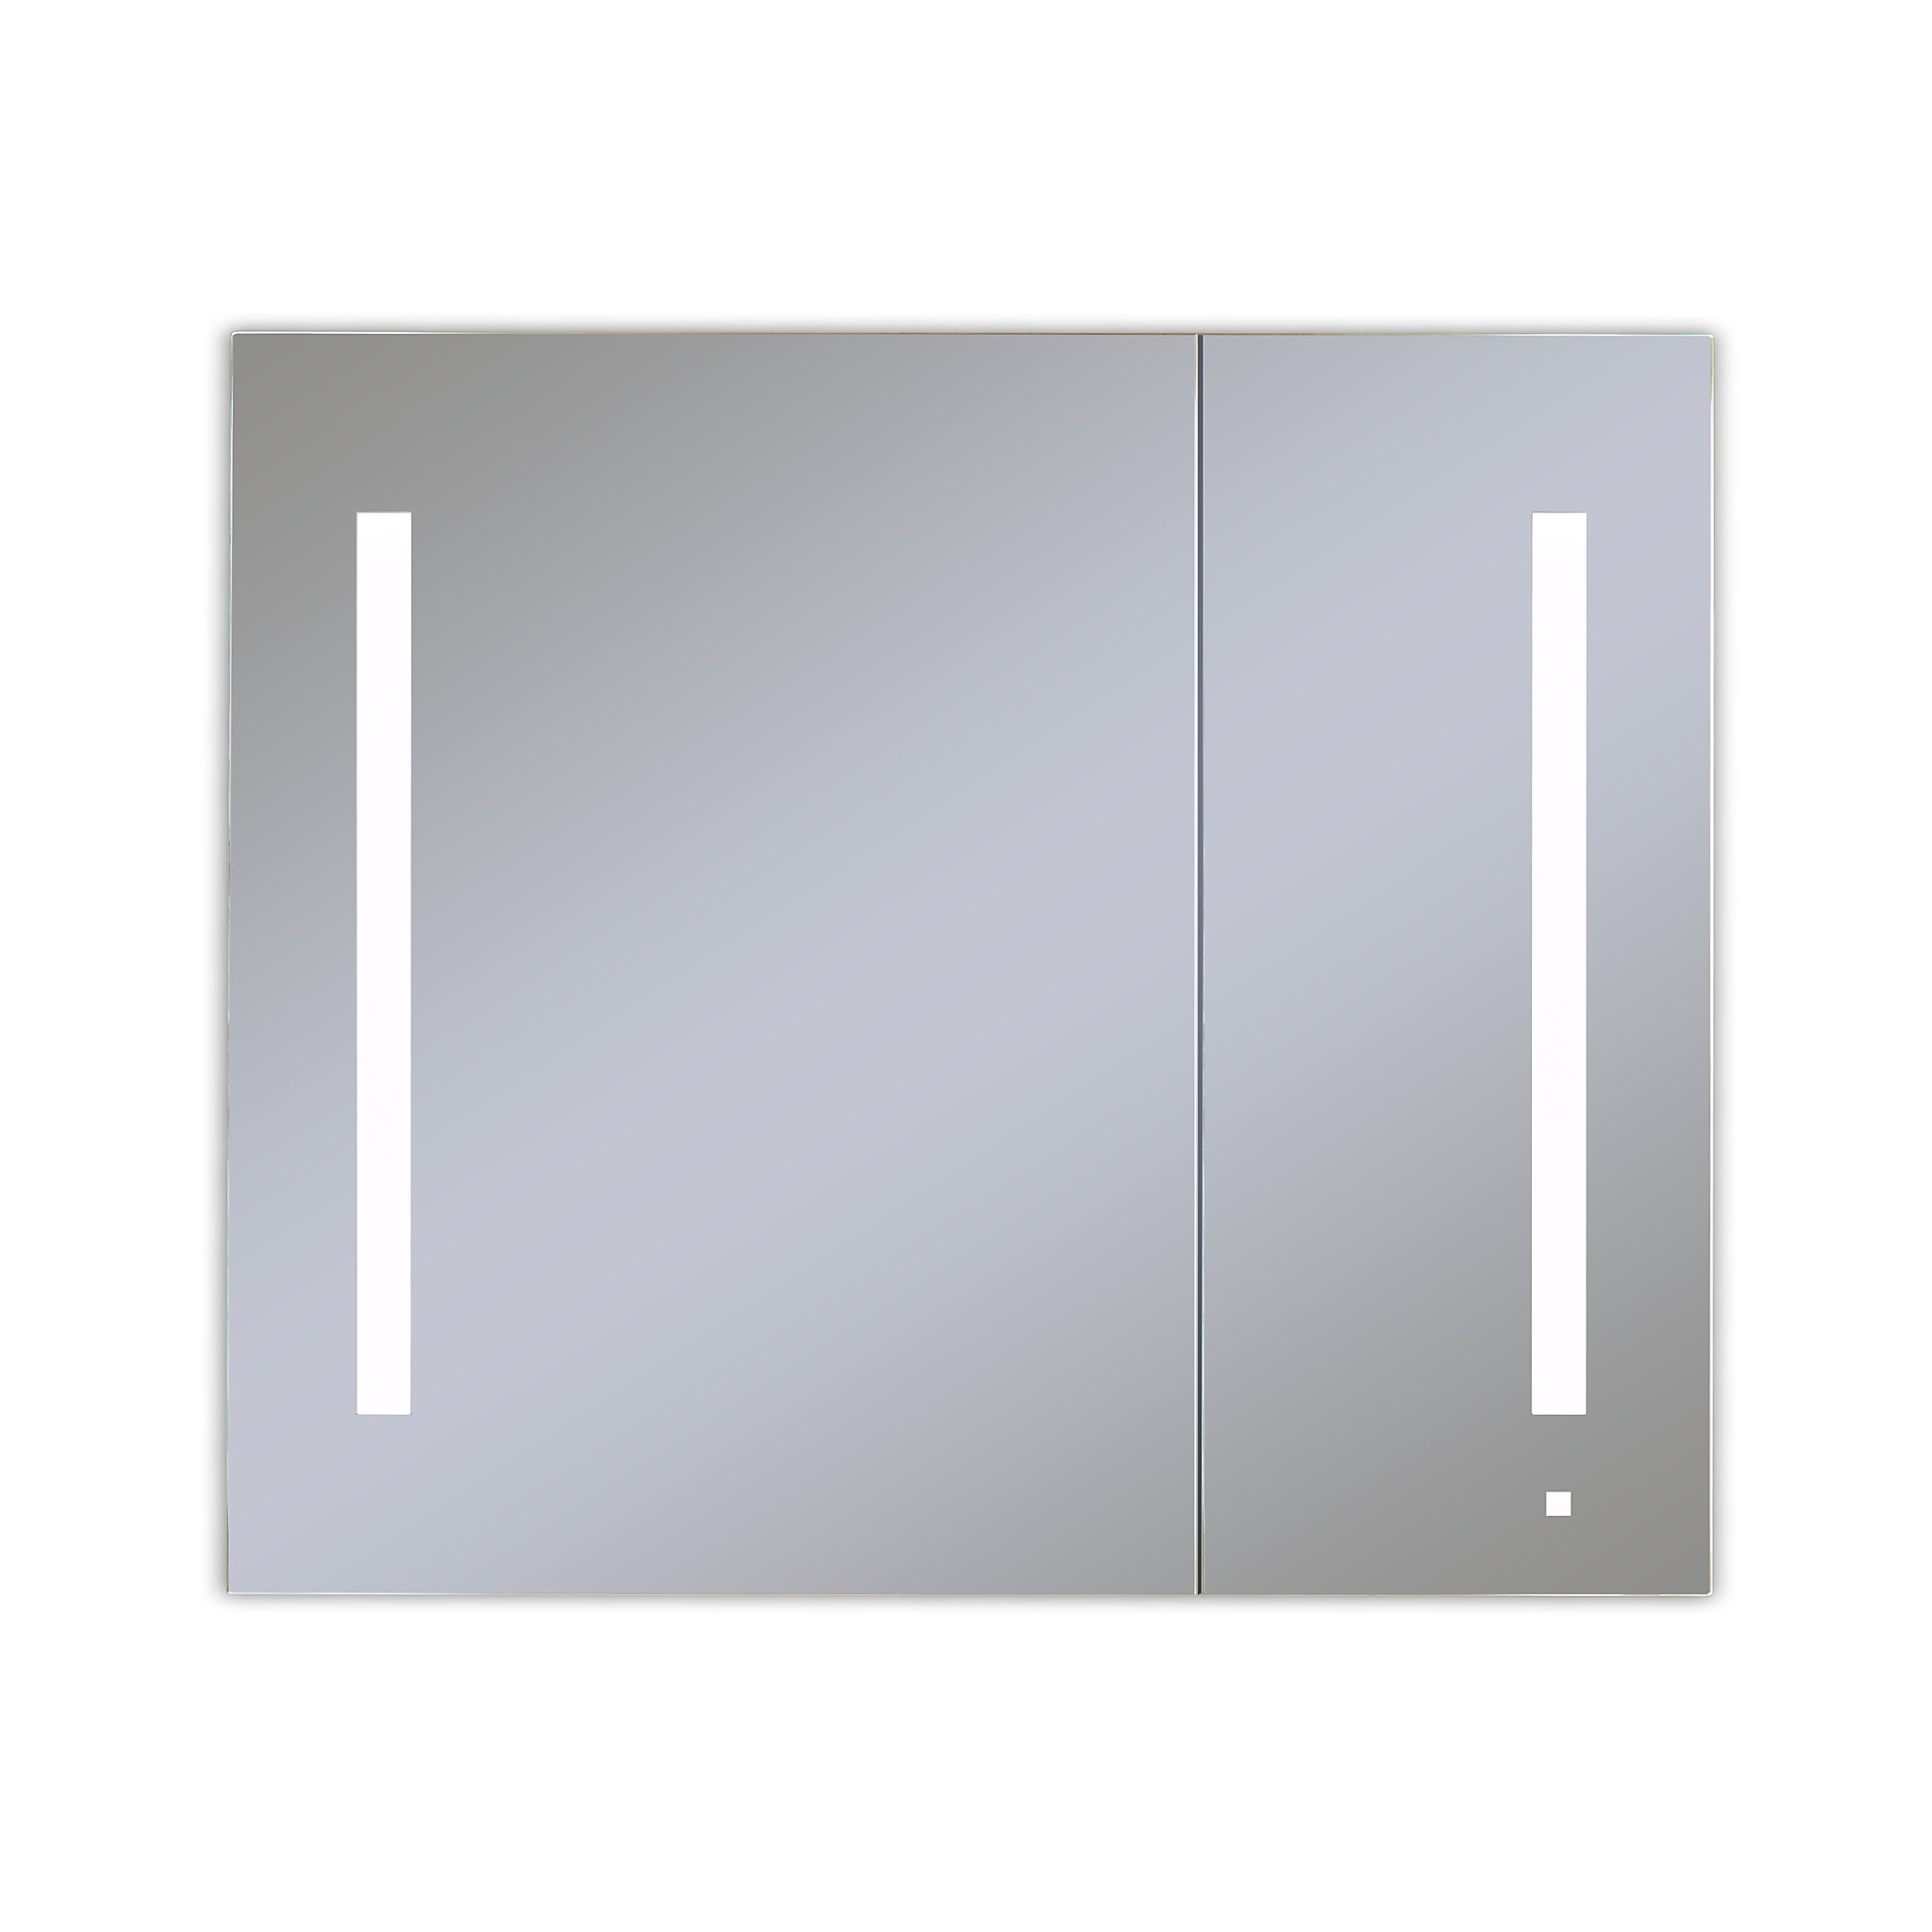 Robern AC3630D4P2LA AiO Lighted Cabinet, 36" x 30" x 4", Two Door, LUM Lighting, 4000K Temperature (Cool Light), Dimmable, OM Au